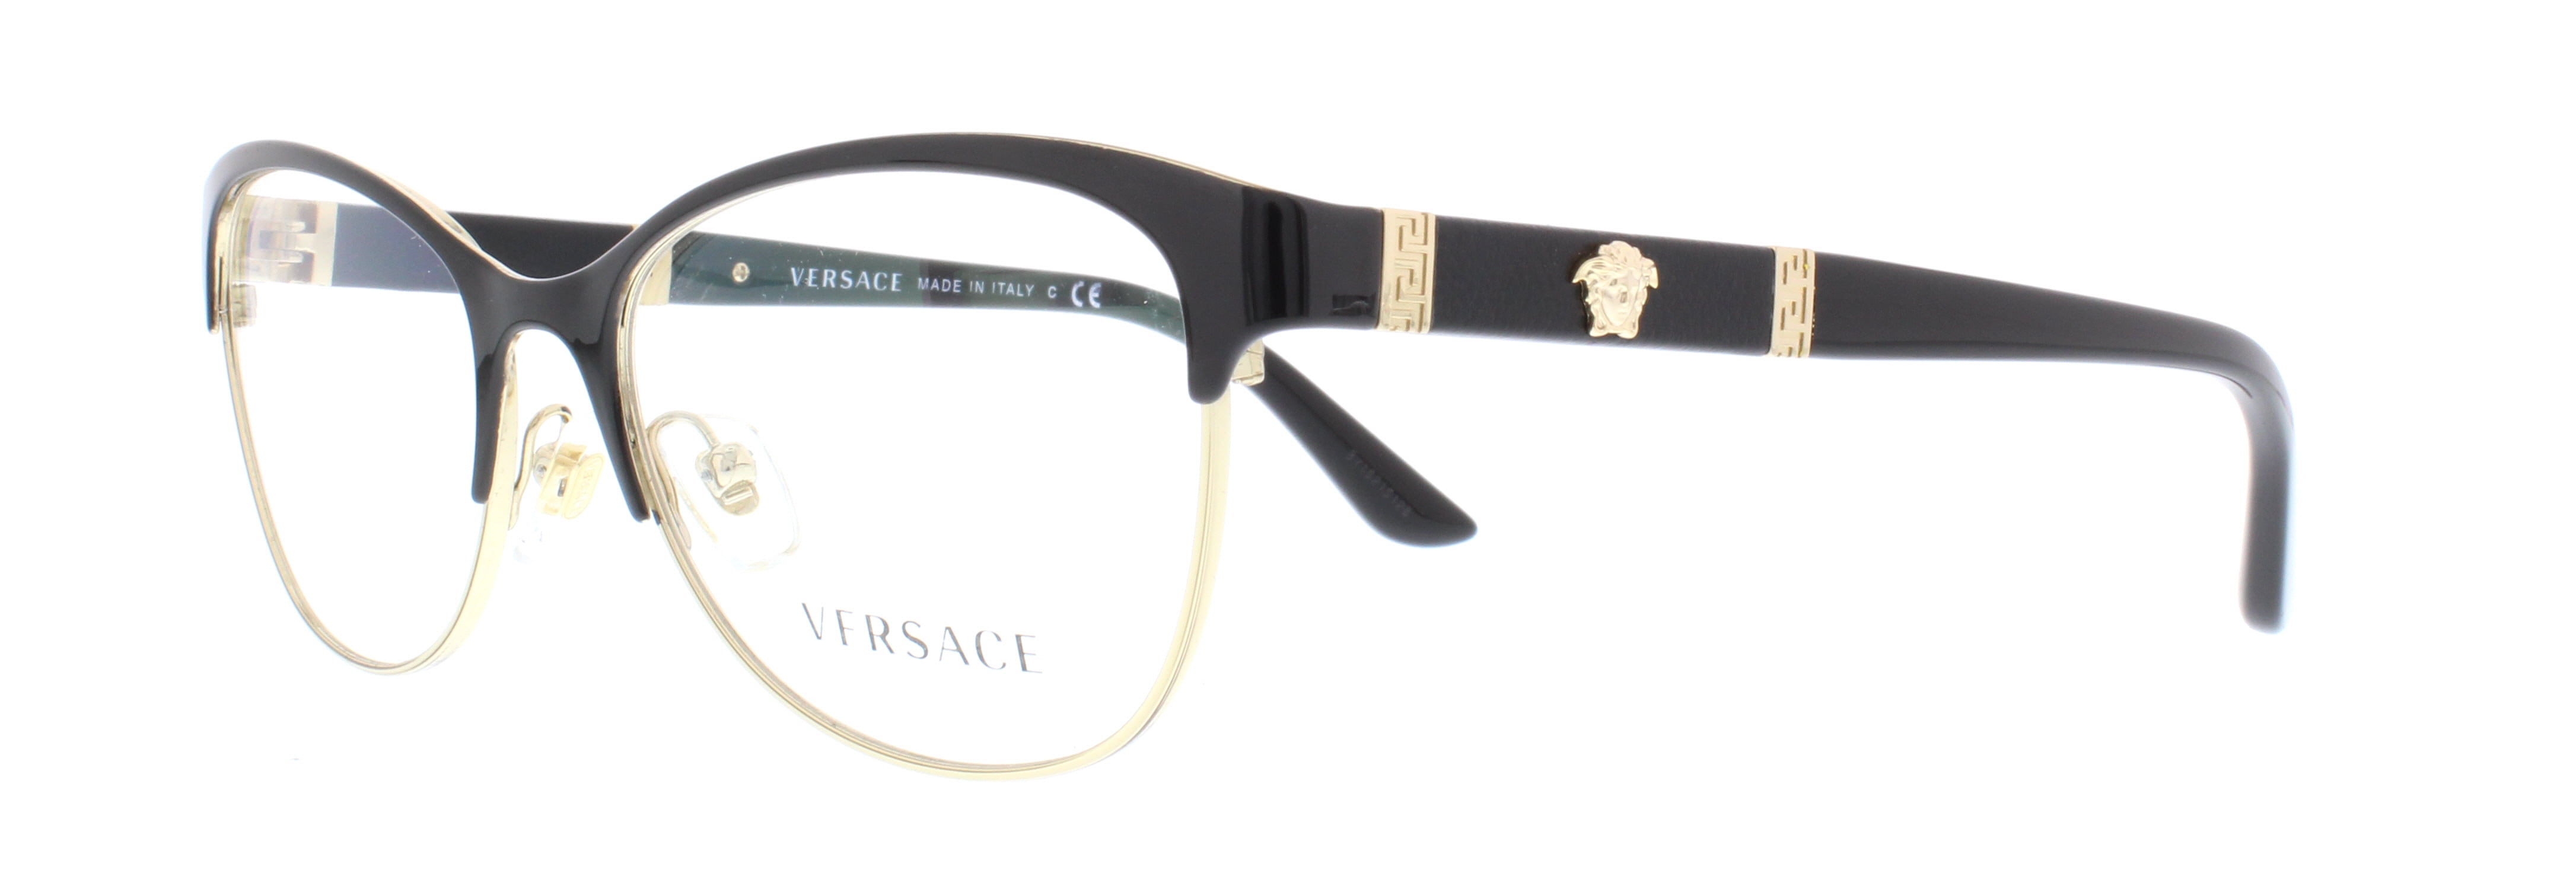 versace glasses black and gold online -